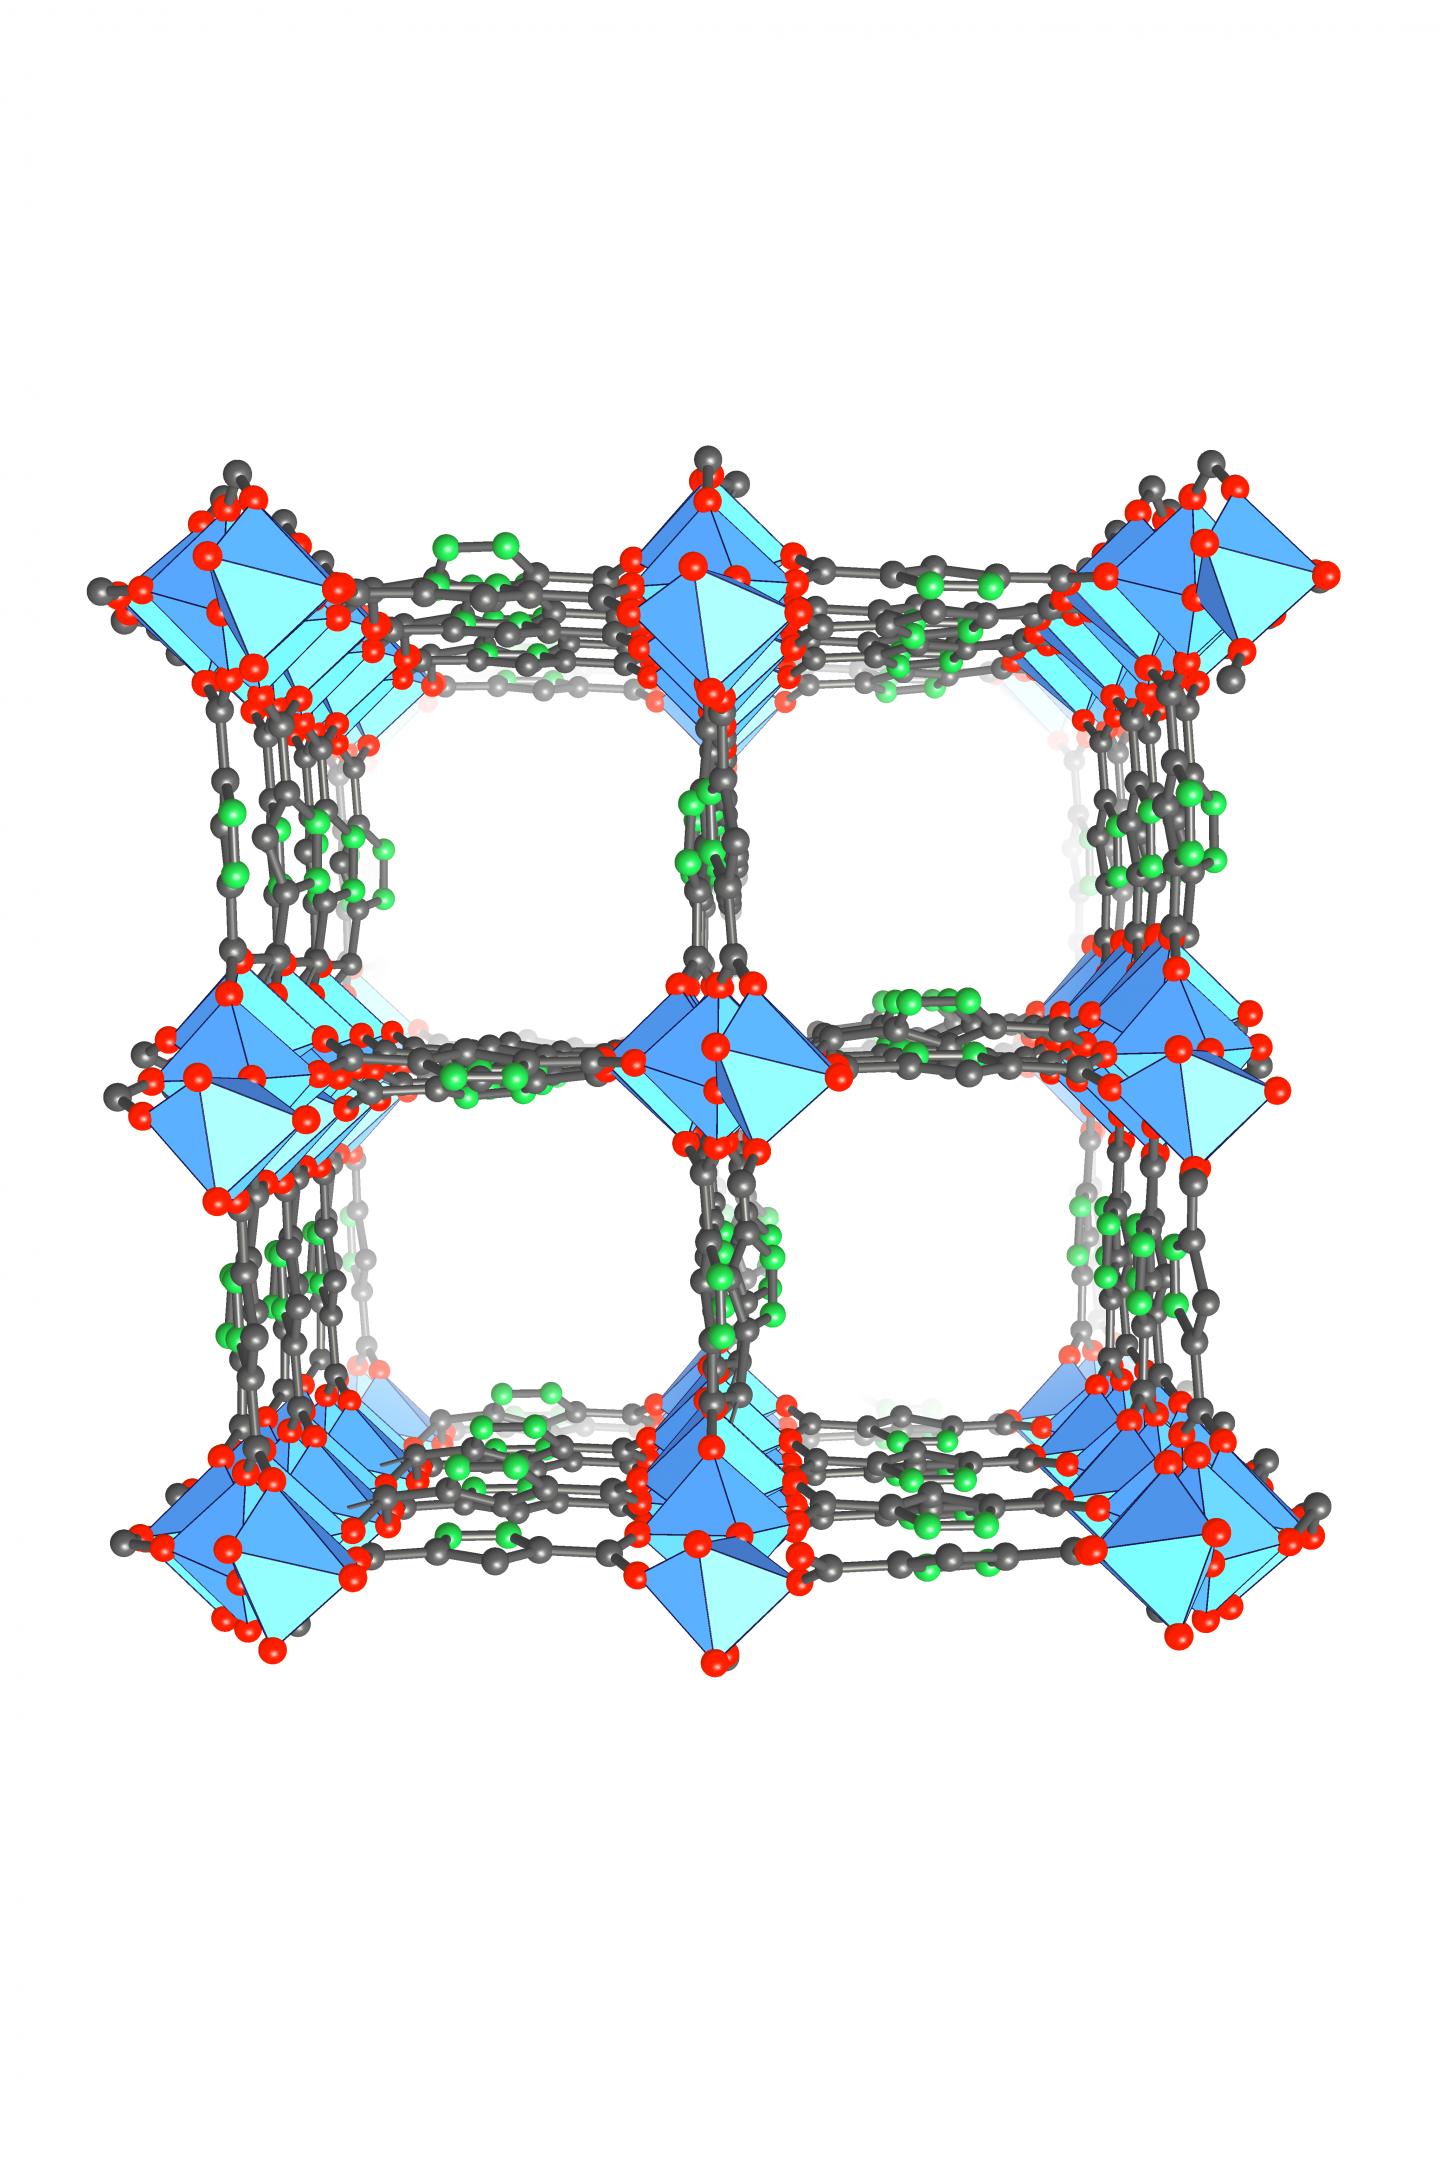 Crystal structure of MOF-303